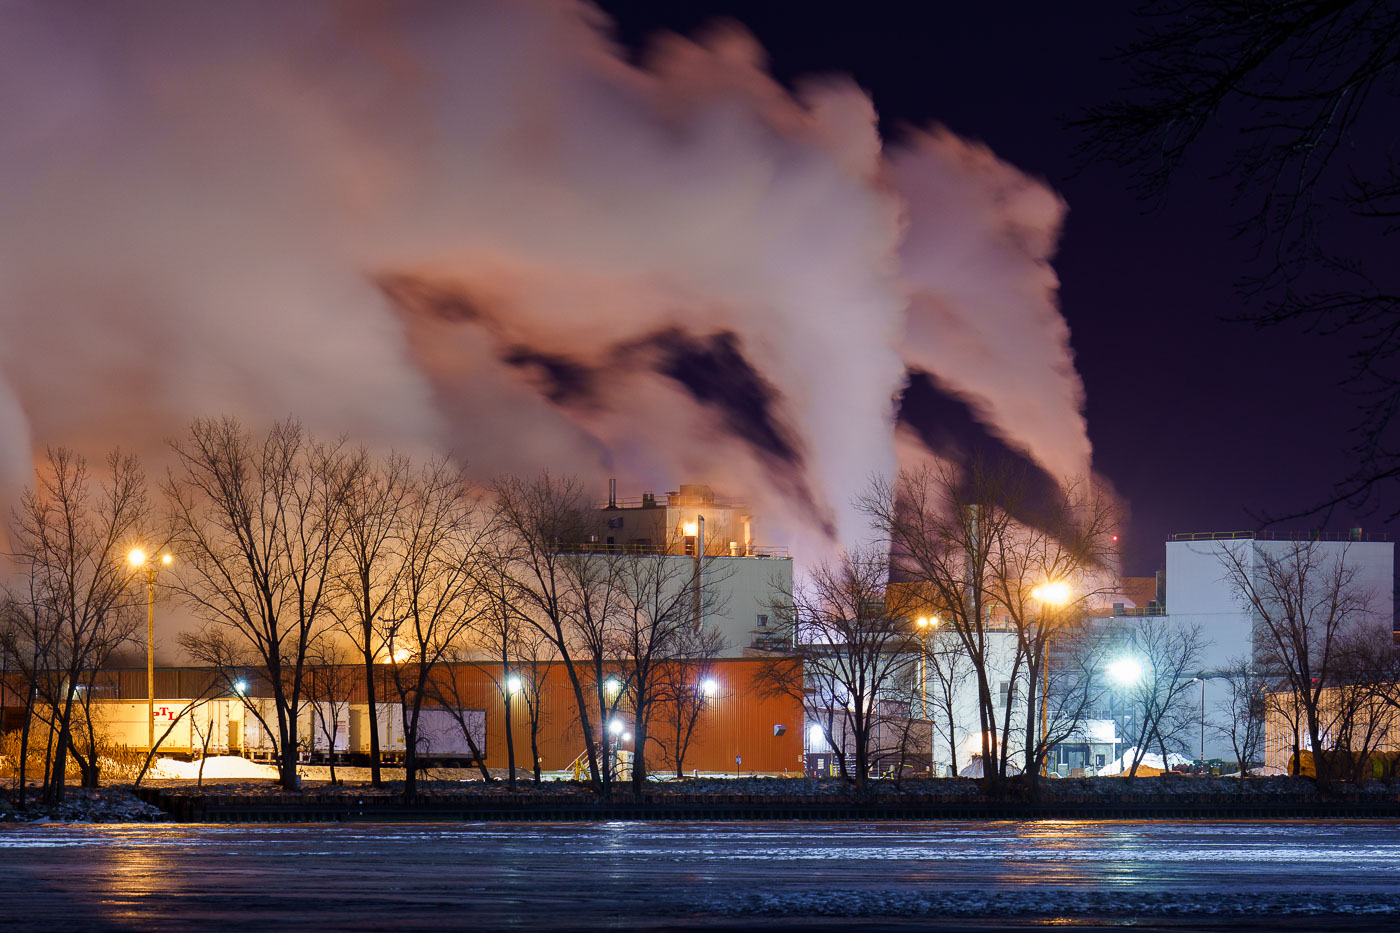 Green Bay Packaging facility in Wisconsin